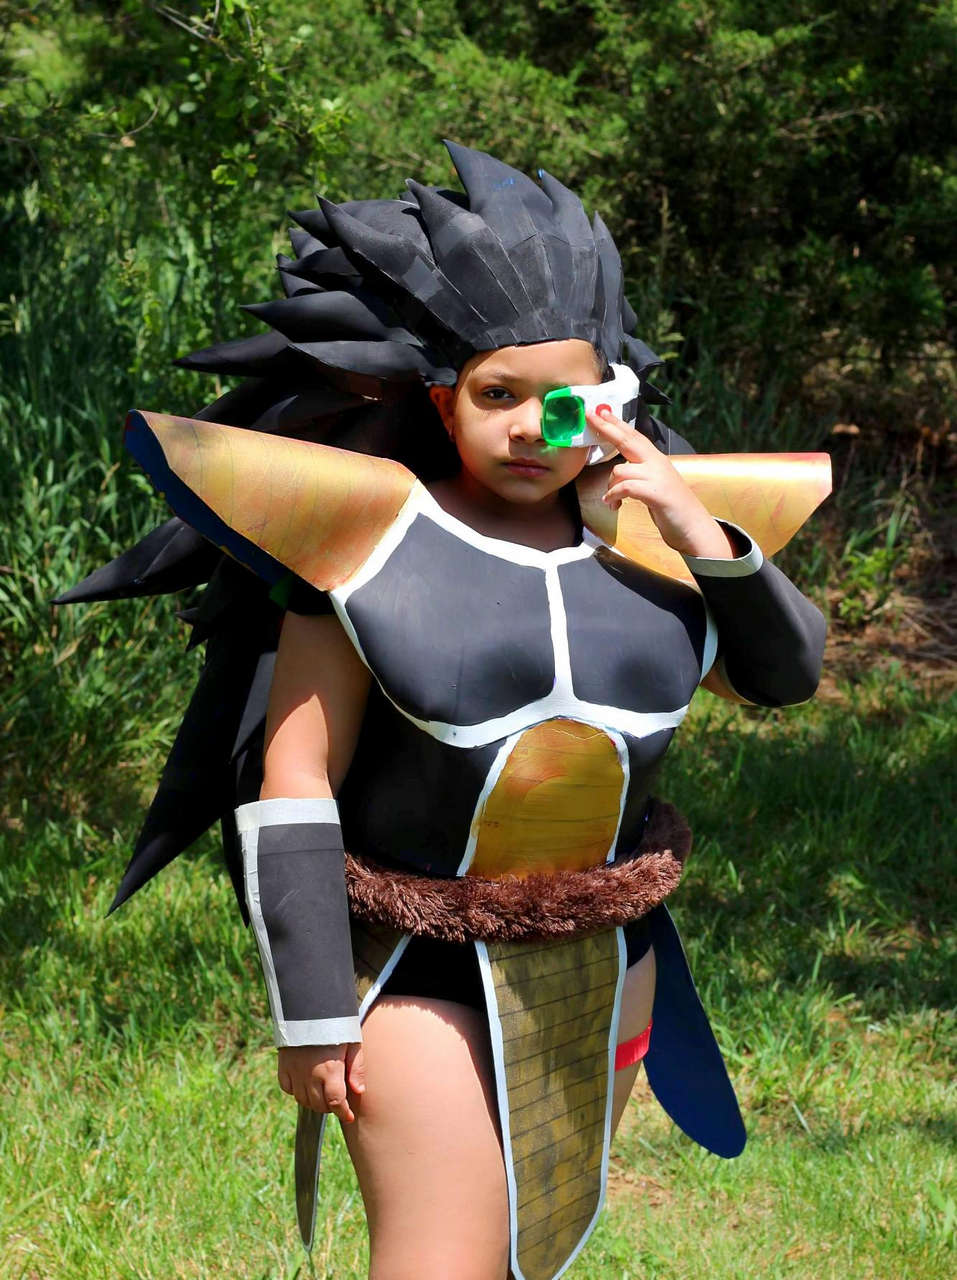 Self Cosplay By Vi0letteverse As Raditz From Dragon Ball 